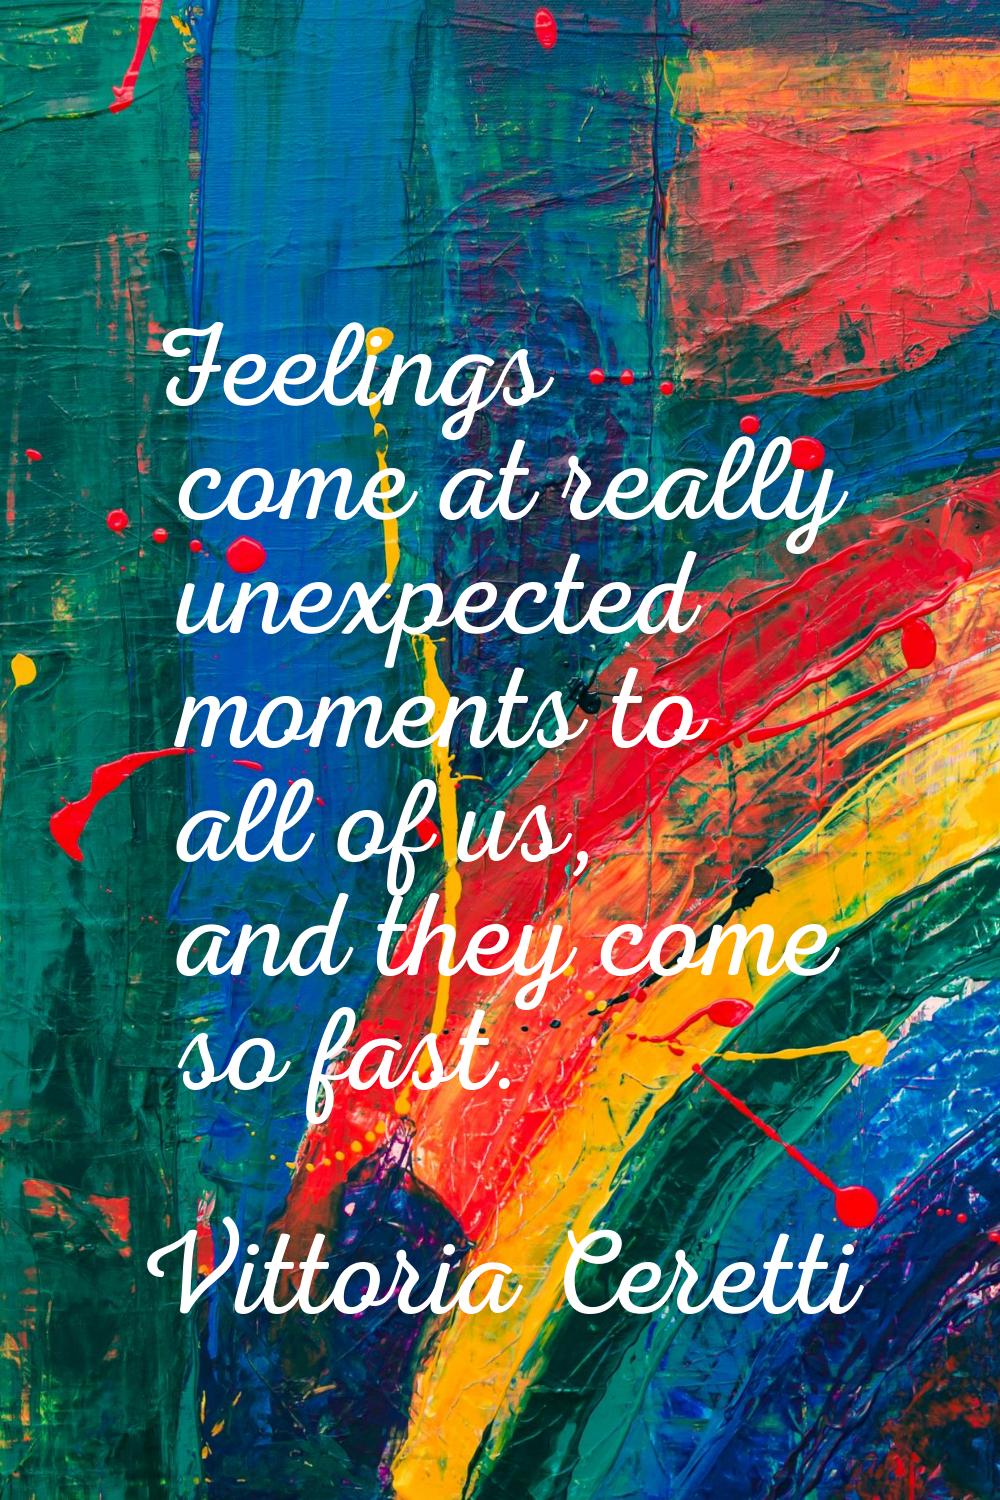 Feelings come at really unexpected moments to all of us, and they come so fast.